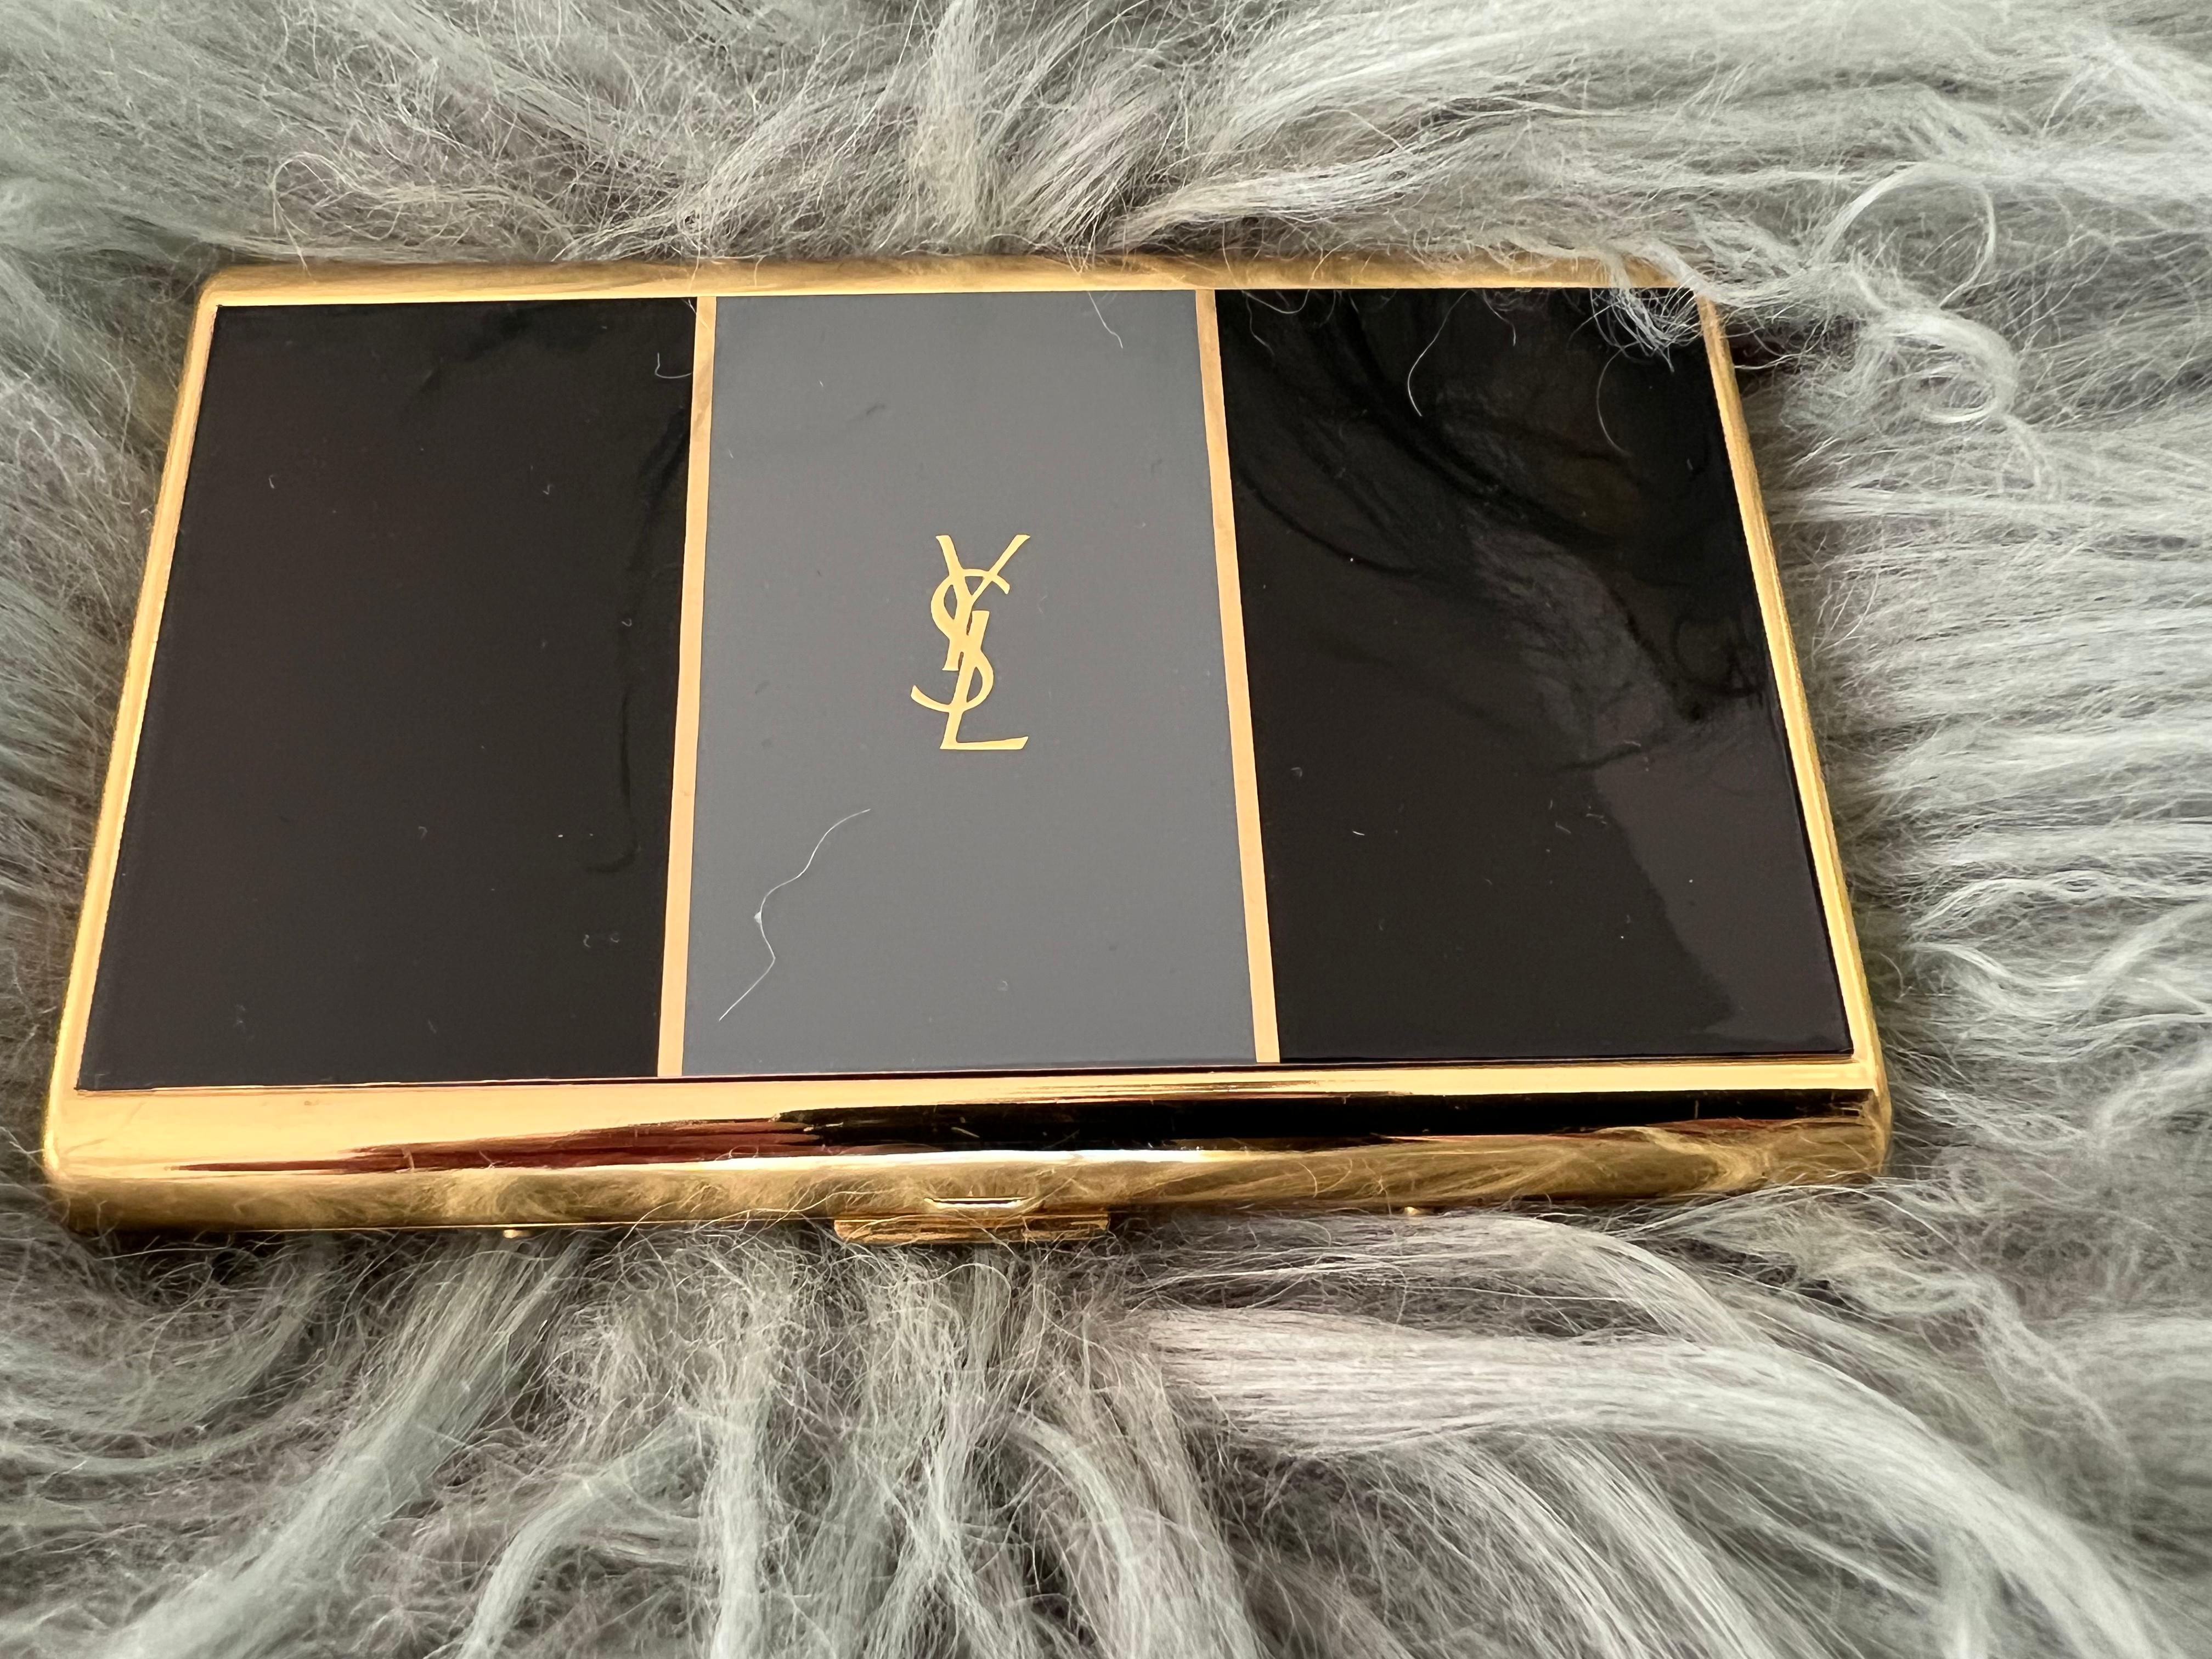 “YSL” Yves Saint Laurent retro cigarette case 
Logo Cigarette Case Gold Black Blue
The case is in mint condition. 
The clasp snaps as new. 
Retro. 
1970s
Gold plated. 
Signed YSL.
Very elegant and perfect for a unique classic gift. 